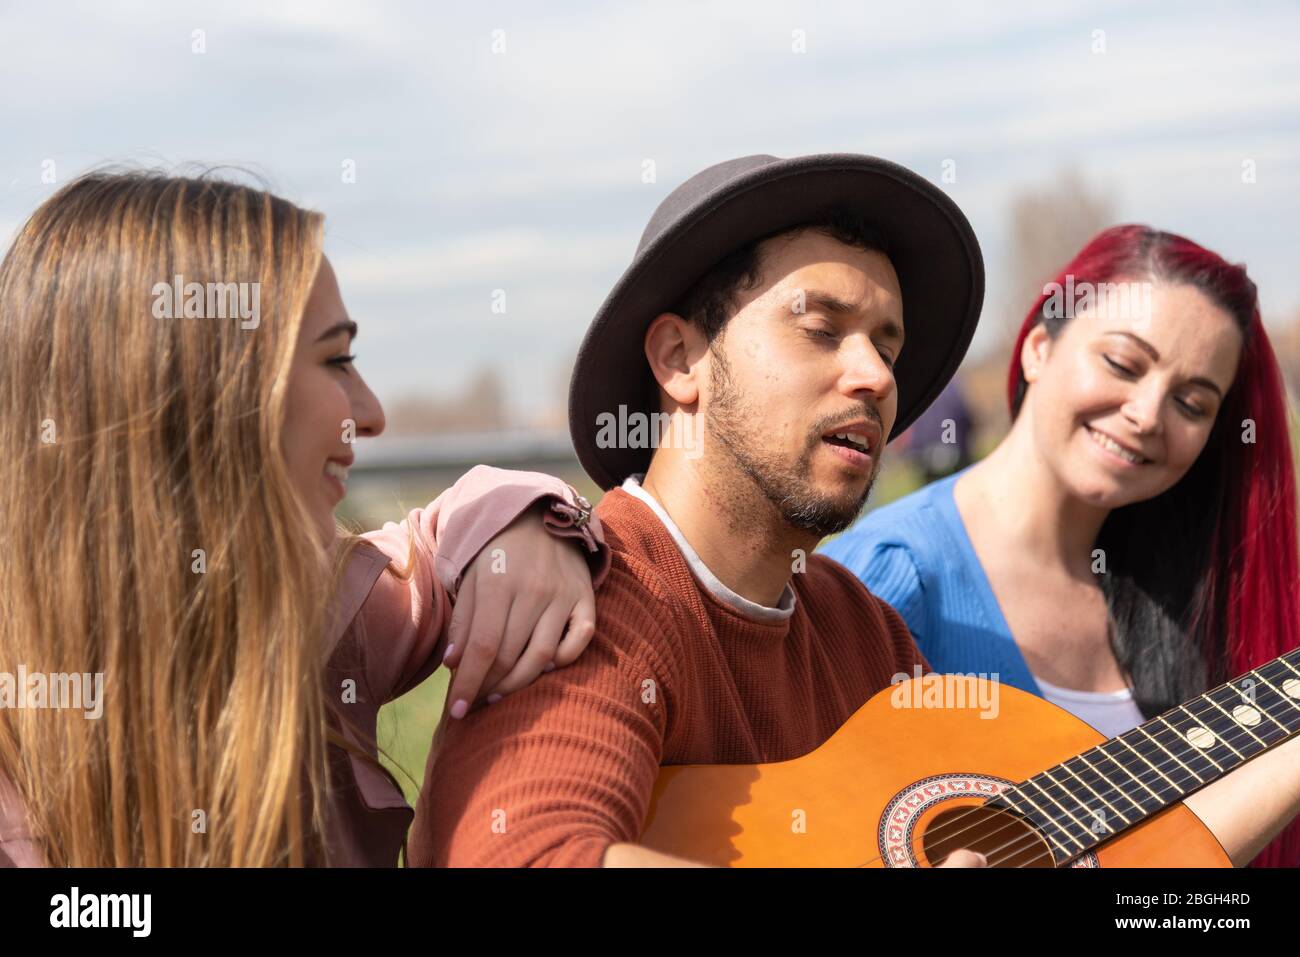 A Hispanic boy in a hat plays the guitar alongside two Caucasian girls in a city park Stock Photo